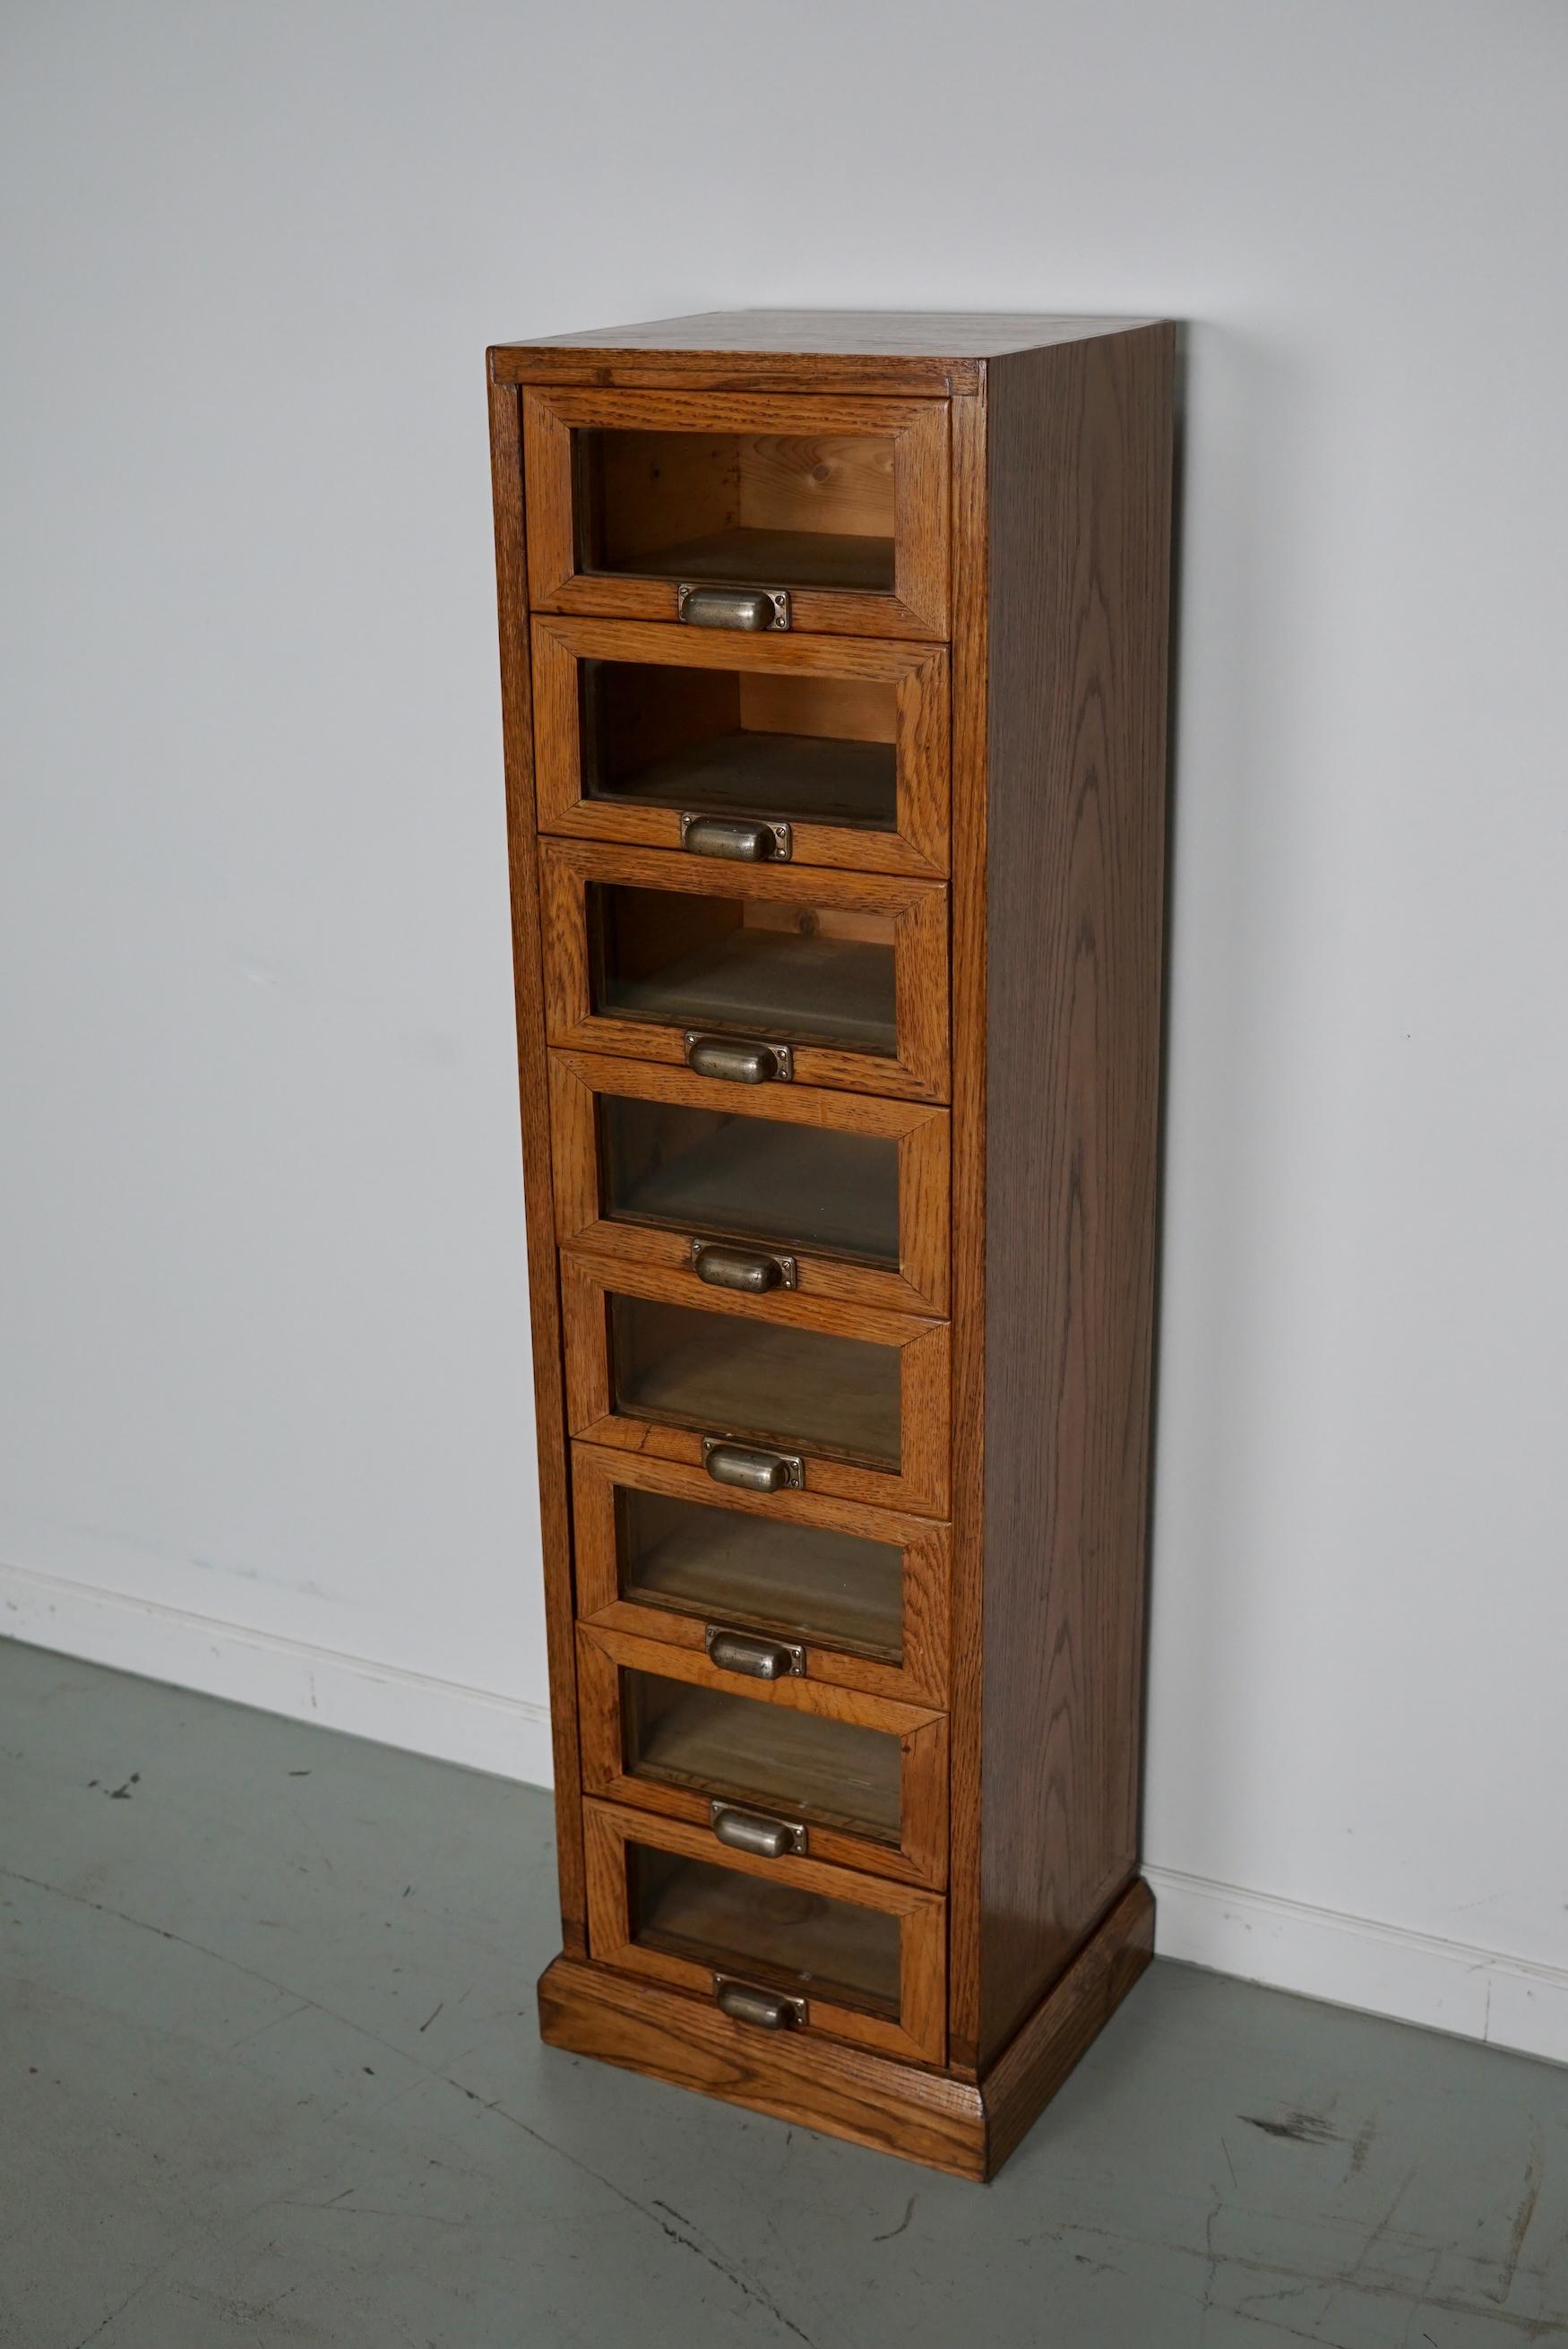 This haberdashery cabinet was produced during the 1950s in the Netherlands. This piece features 8 drawers in light oak with glass fronts and metal handles. It was originally used in a shop for sewing supplies. The interior dimensions of the drawers